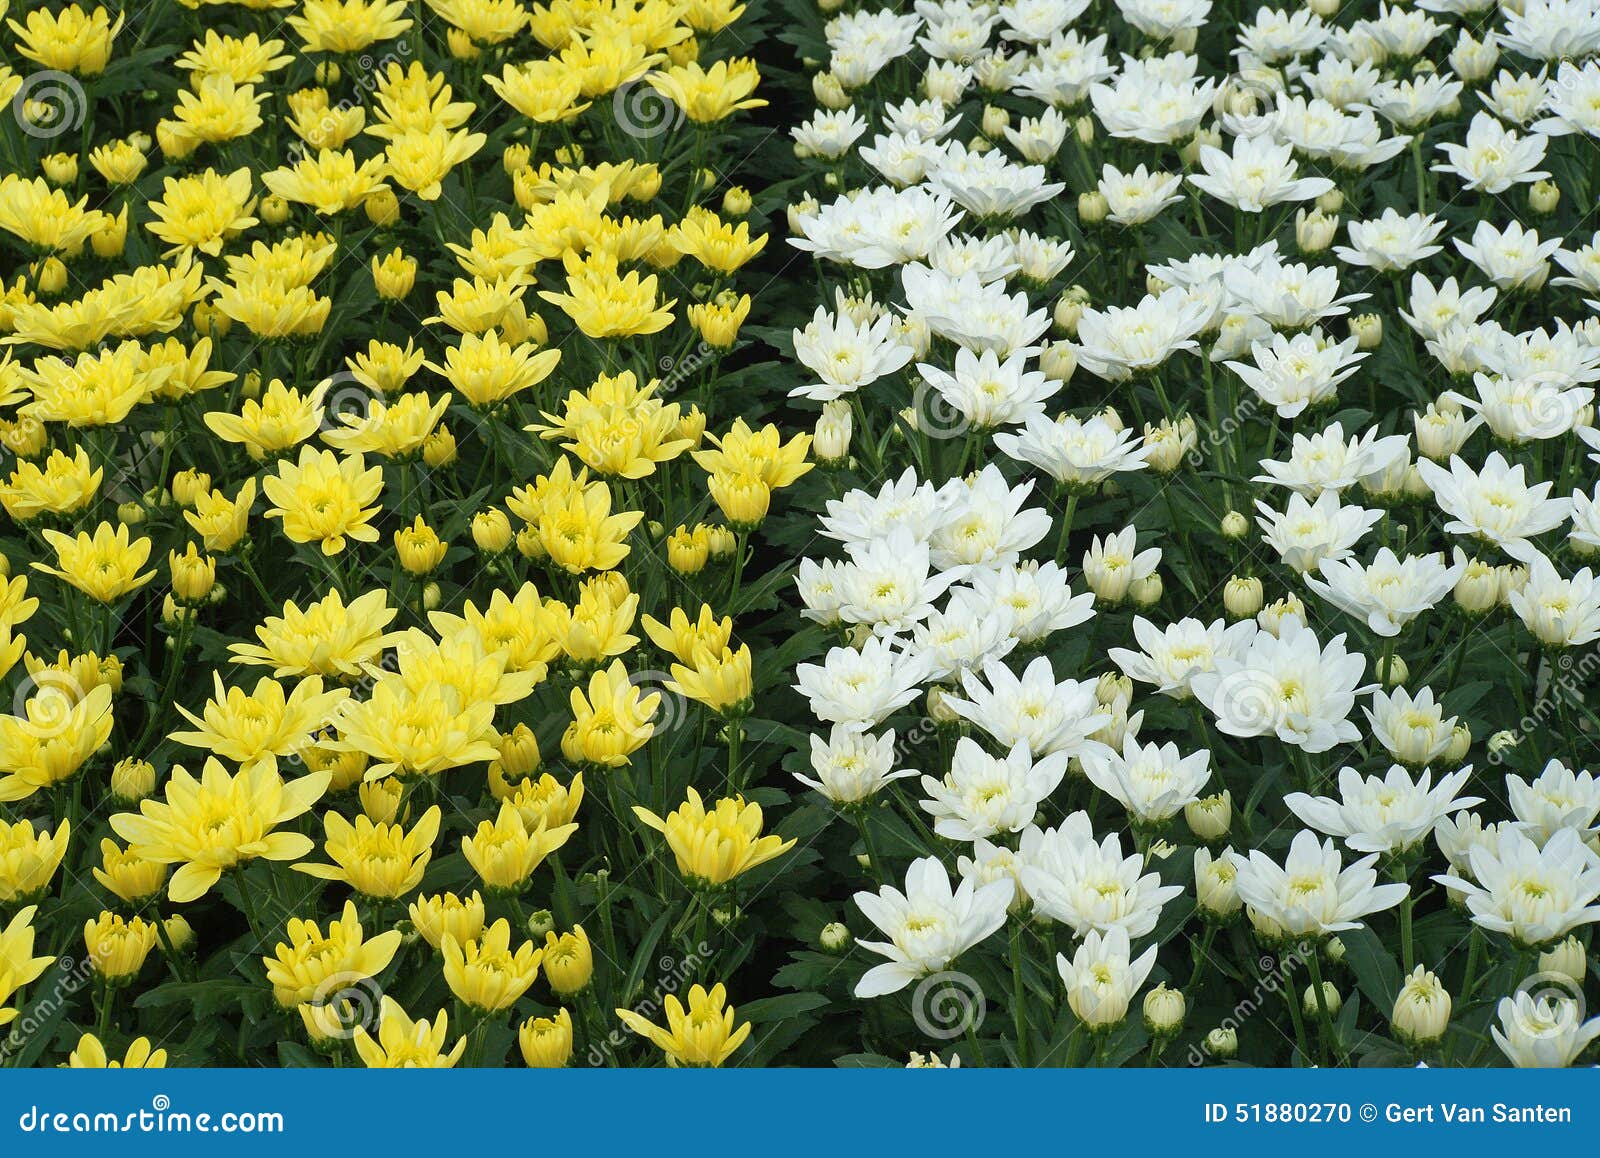 Chrysanthemums Growing In Commercial Greenhouse Stock Photo  Image 